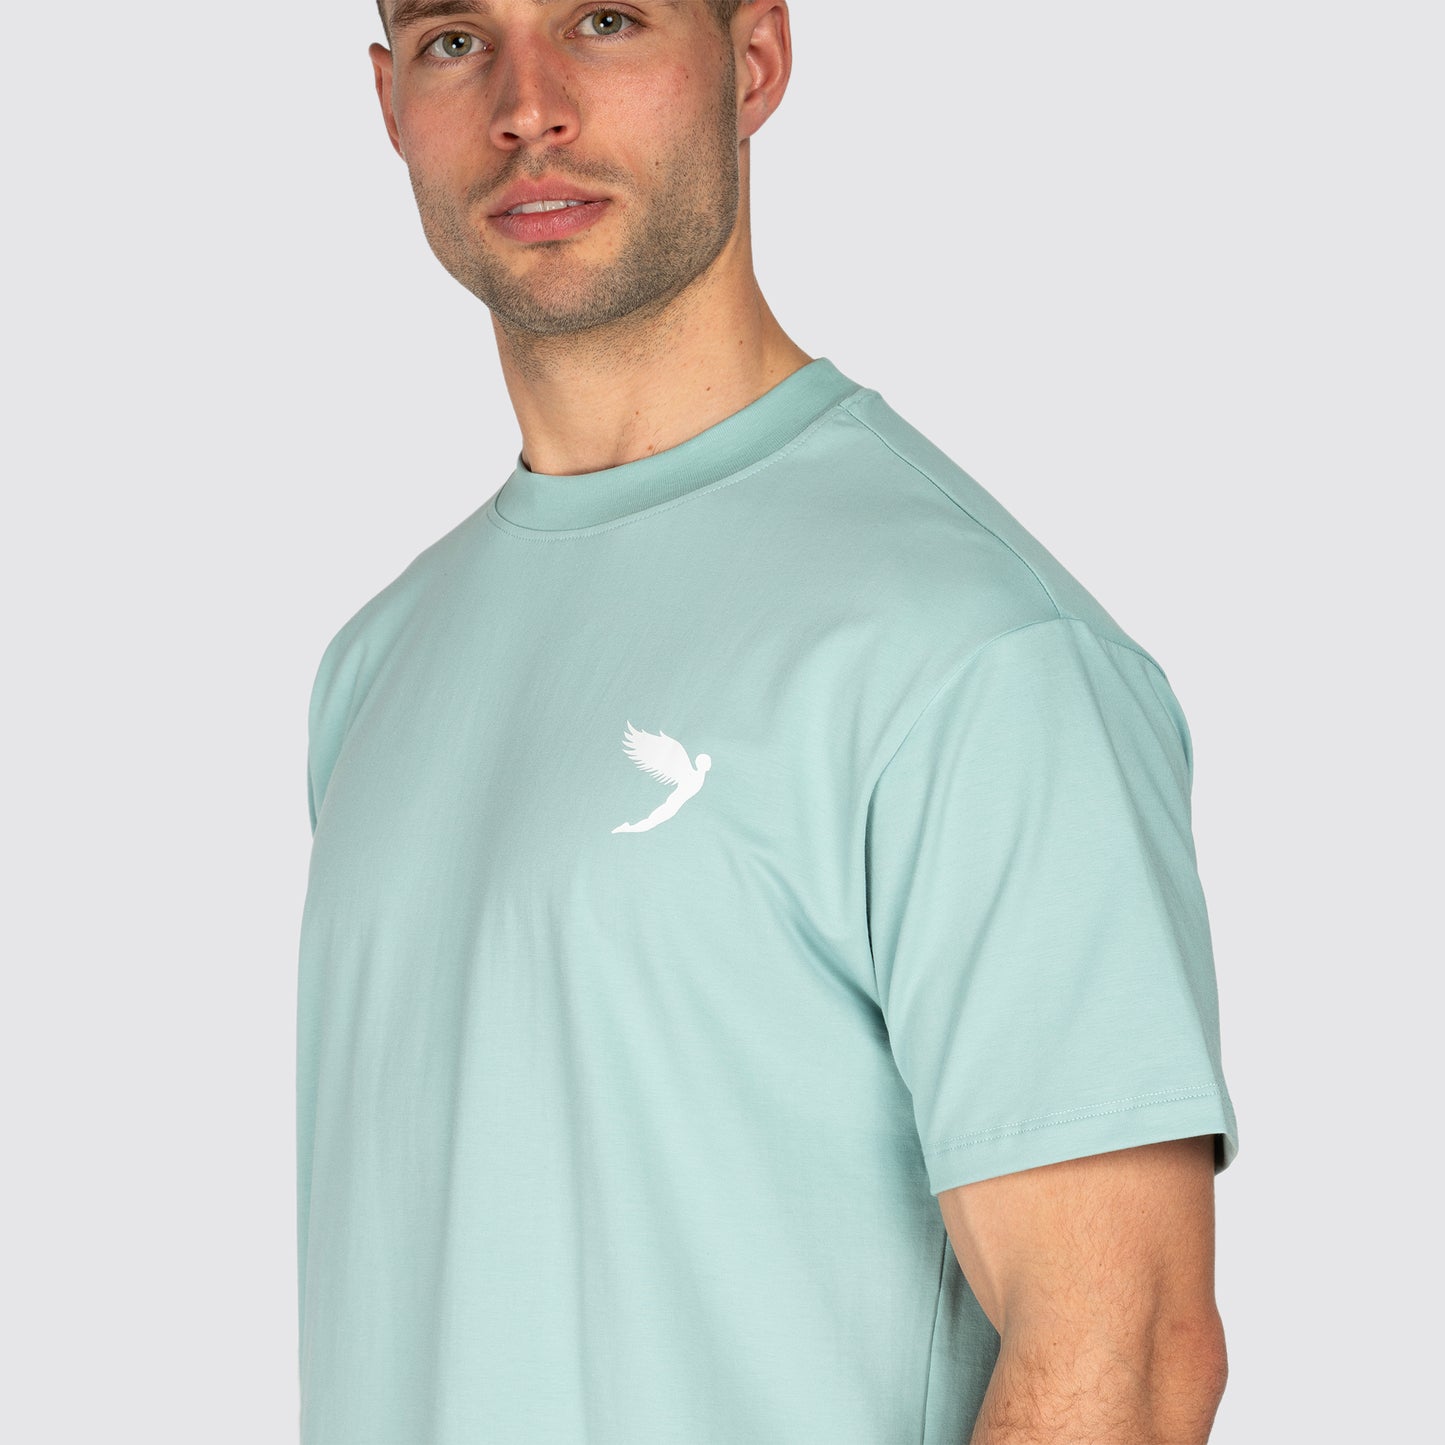 Undisputed Relaxed Fit Tee Mint (8244019003644)